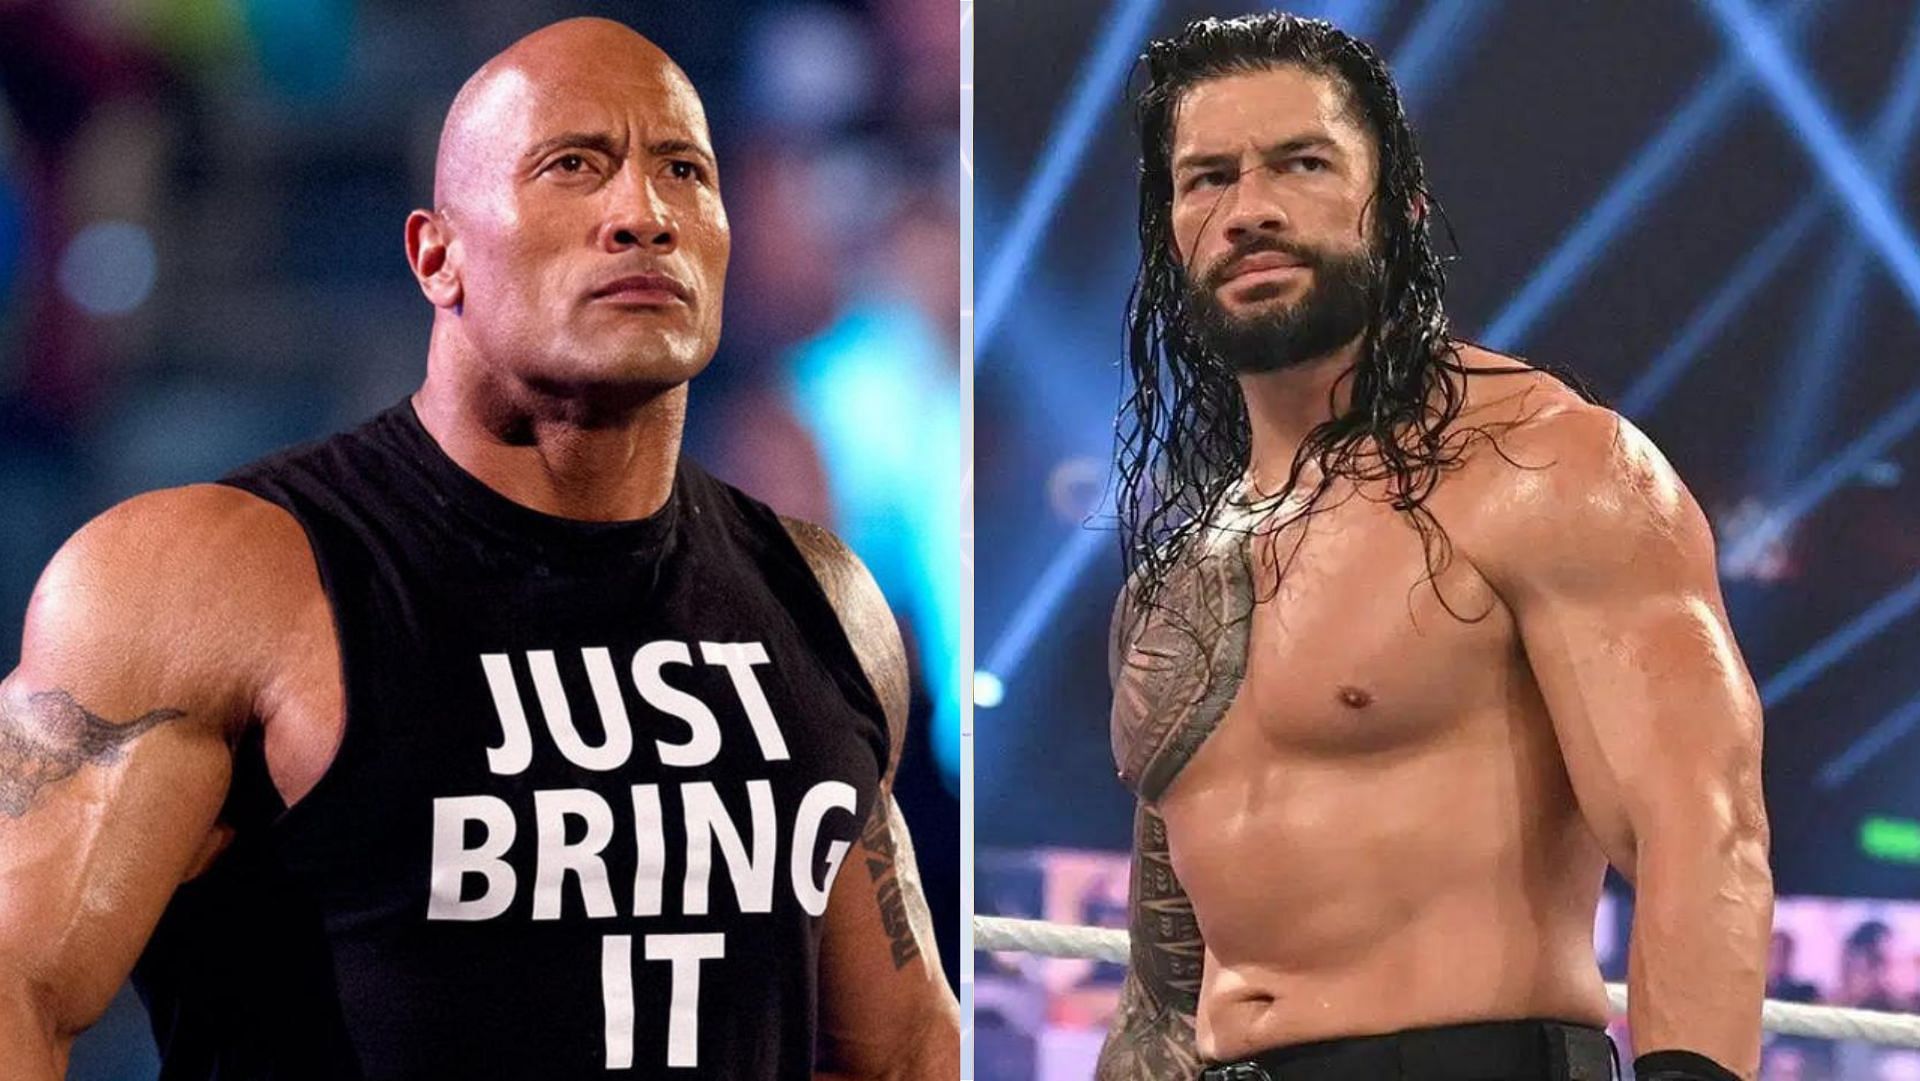 WWE Tag Team Titles The Rock and 12 other Samoan WWE stars who have